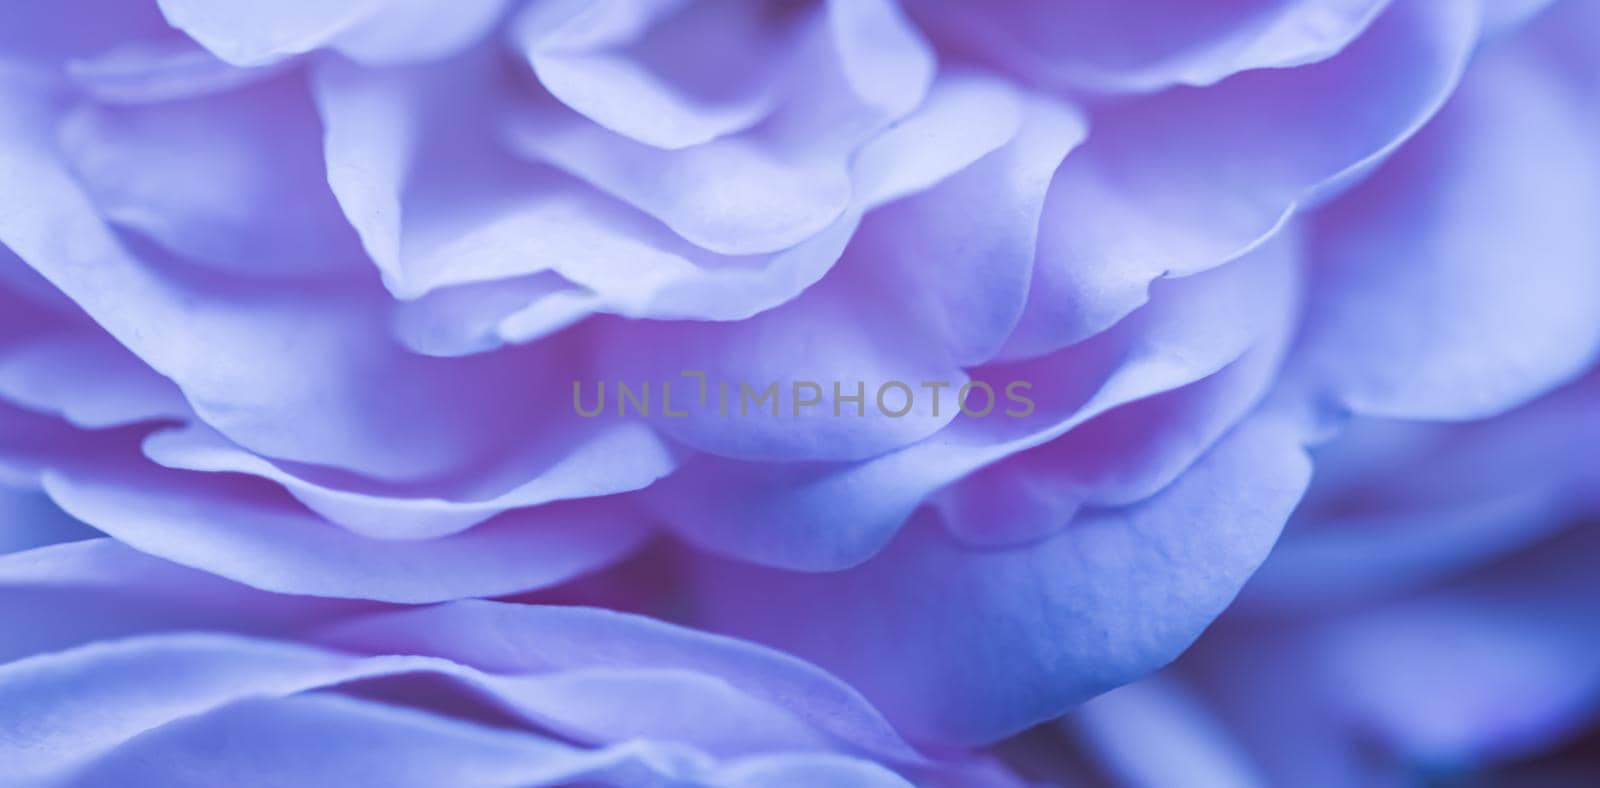 Soft focus, abstract floral background, blue rose flower petals. Macro flowers backdrop for holiday brand design by Olayola